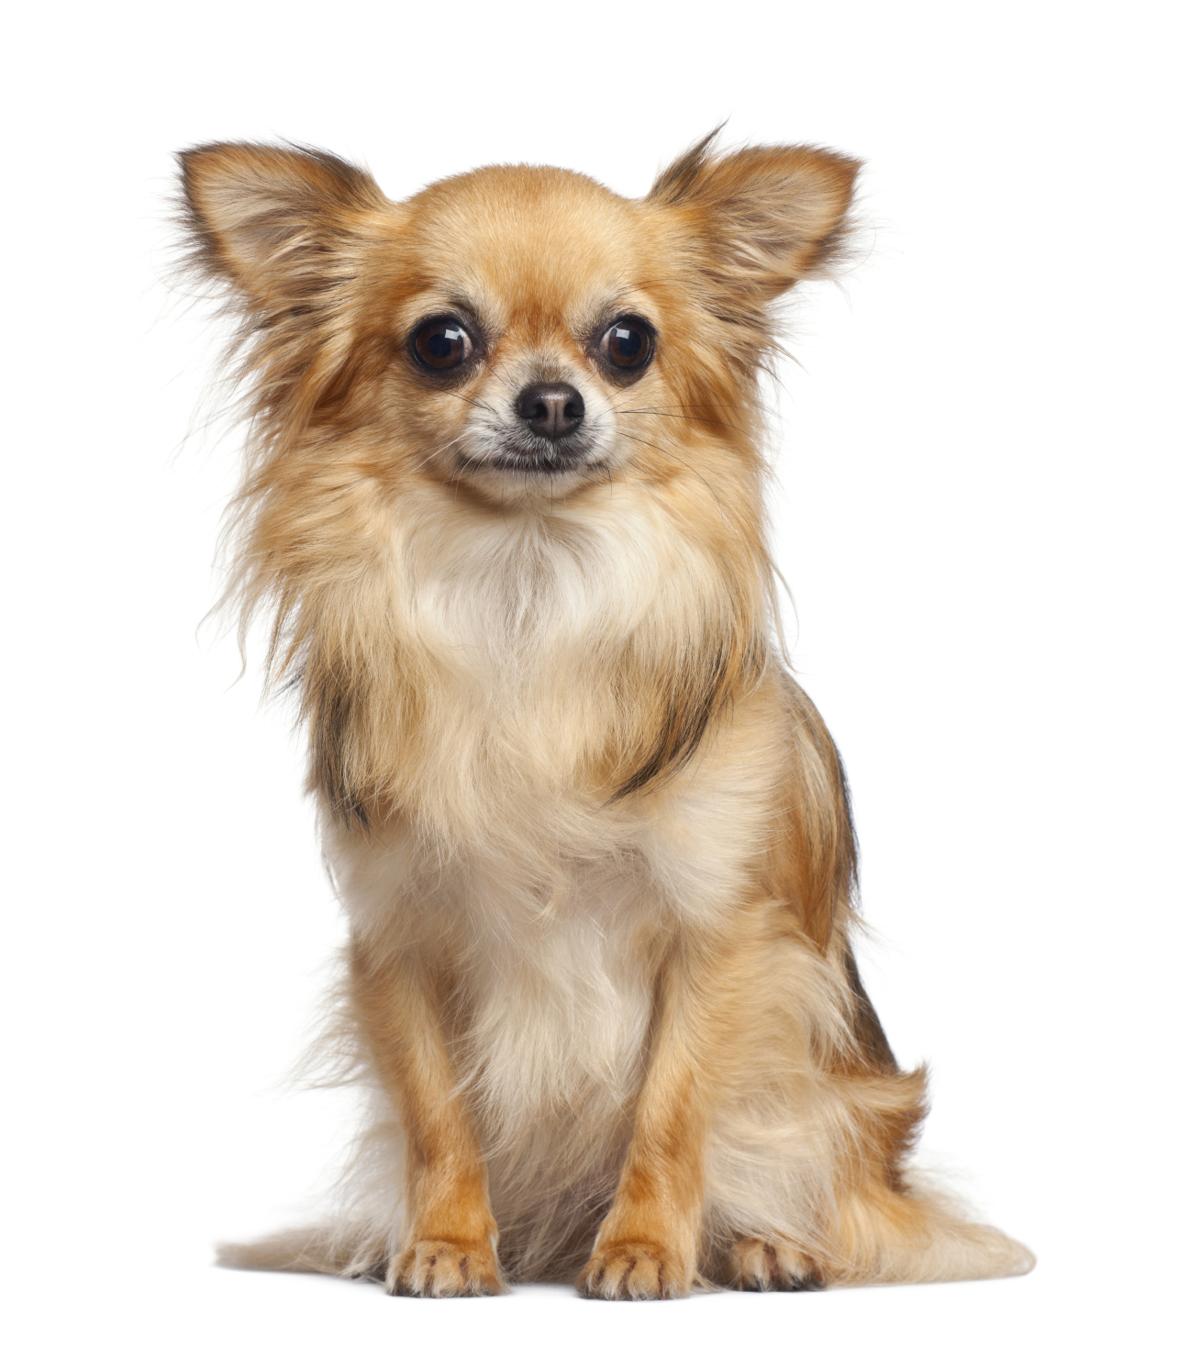 Information About the Delicately Cute Apple-head Chihuahuas